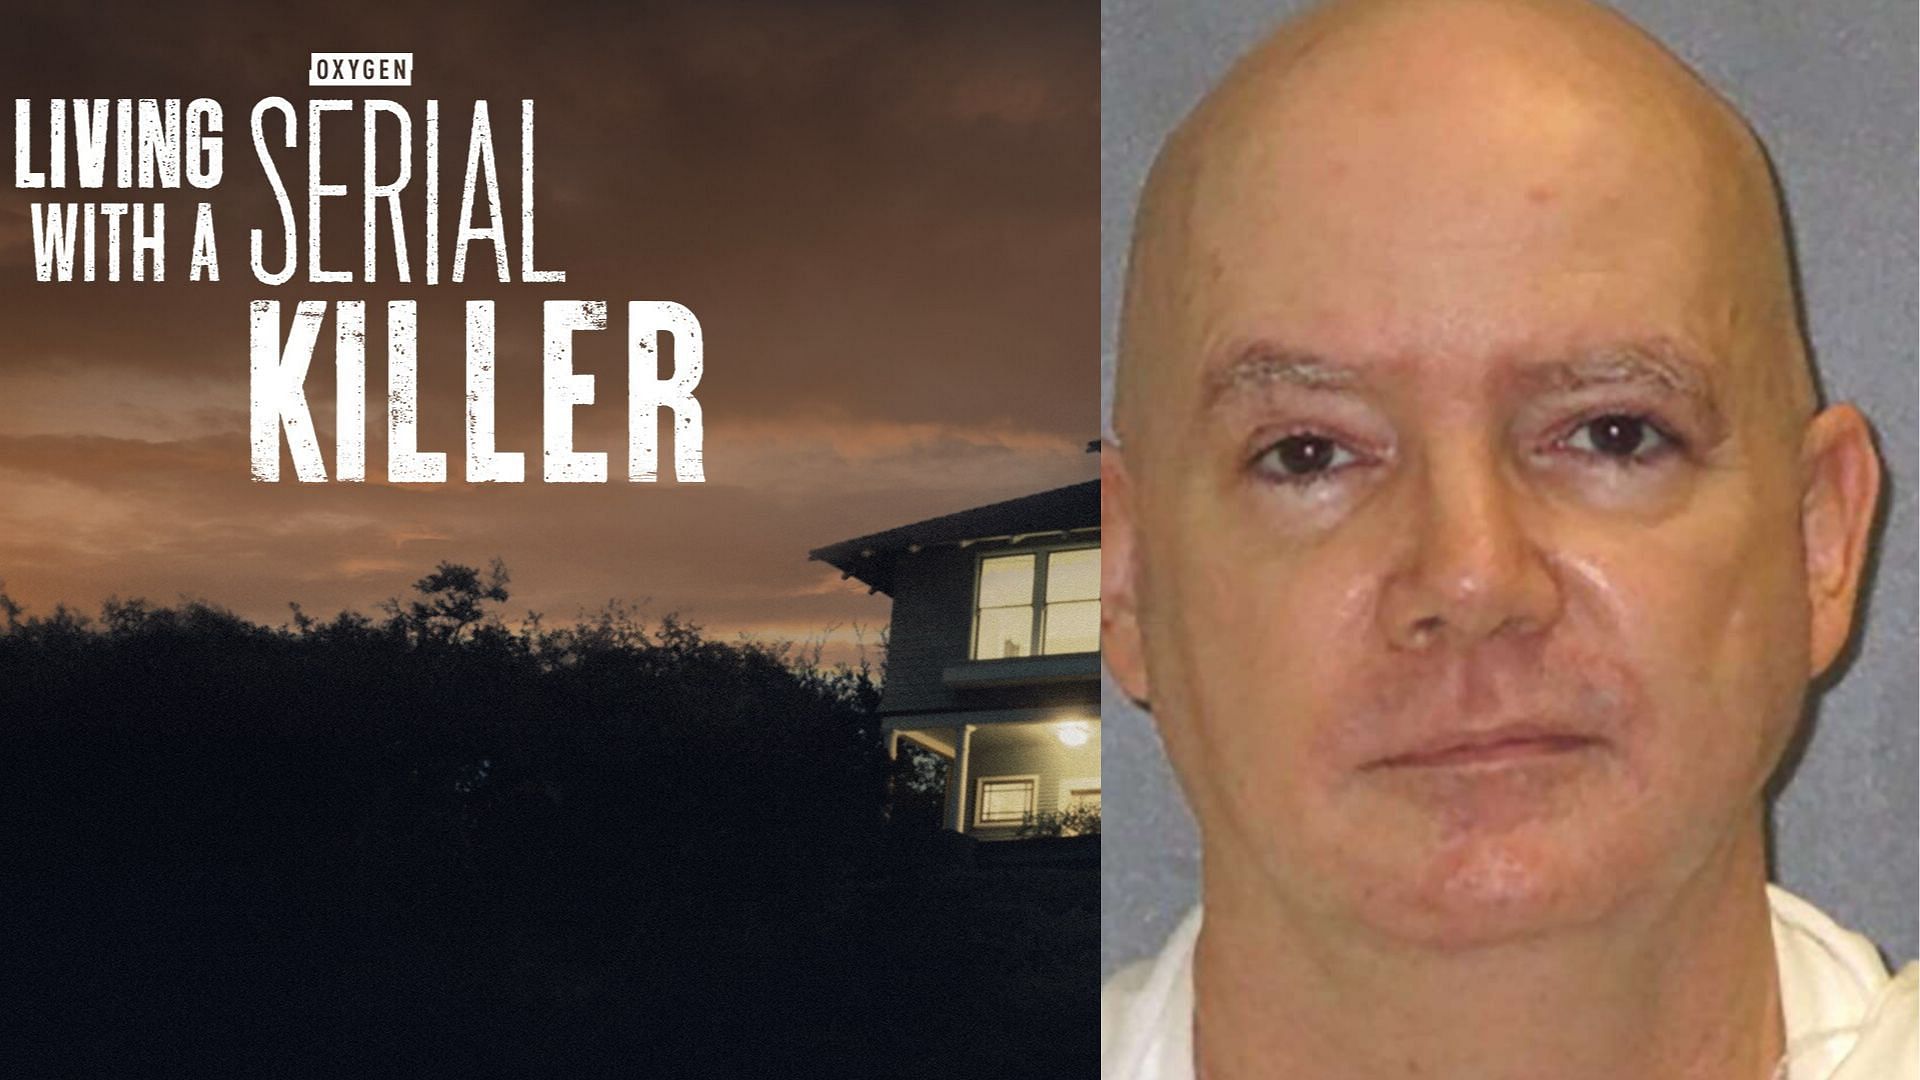 The case of Tourniquet Killer Anthony Allen Shore is all set to be explored in Living with a Serial Killer Season 2 (Images via NBC and NBC News)